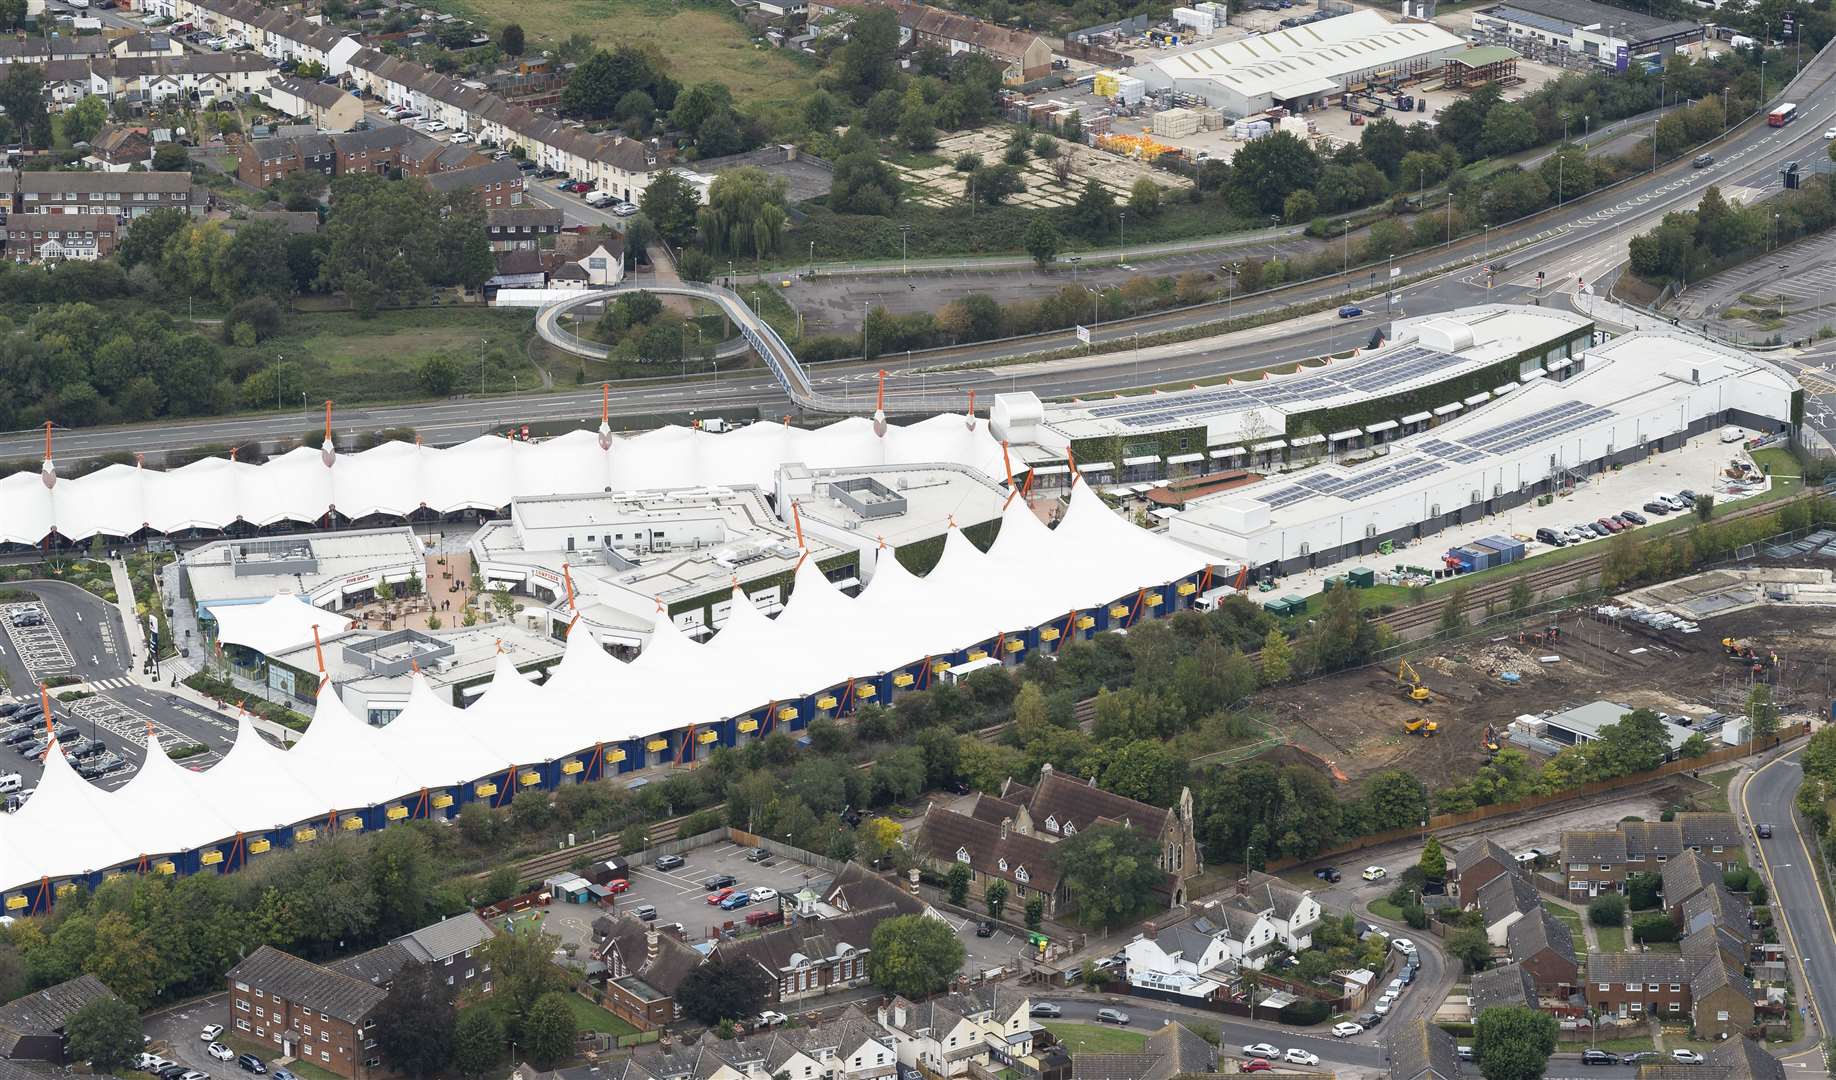 The Designer Outlet's £90m extension pictured in September this year. Picture: Ady Kerry / Ashford Borough Council